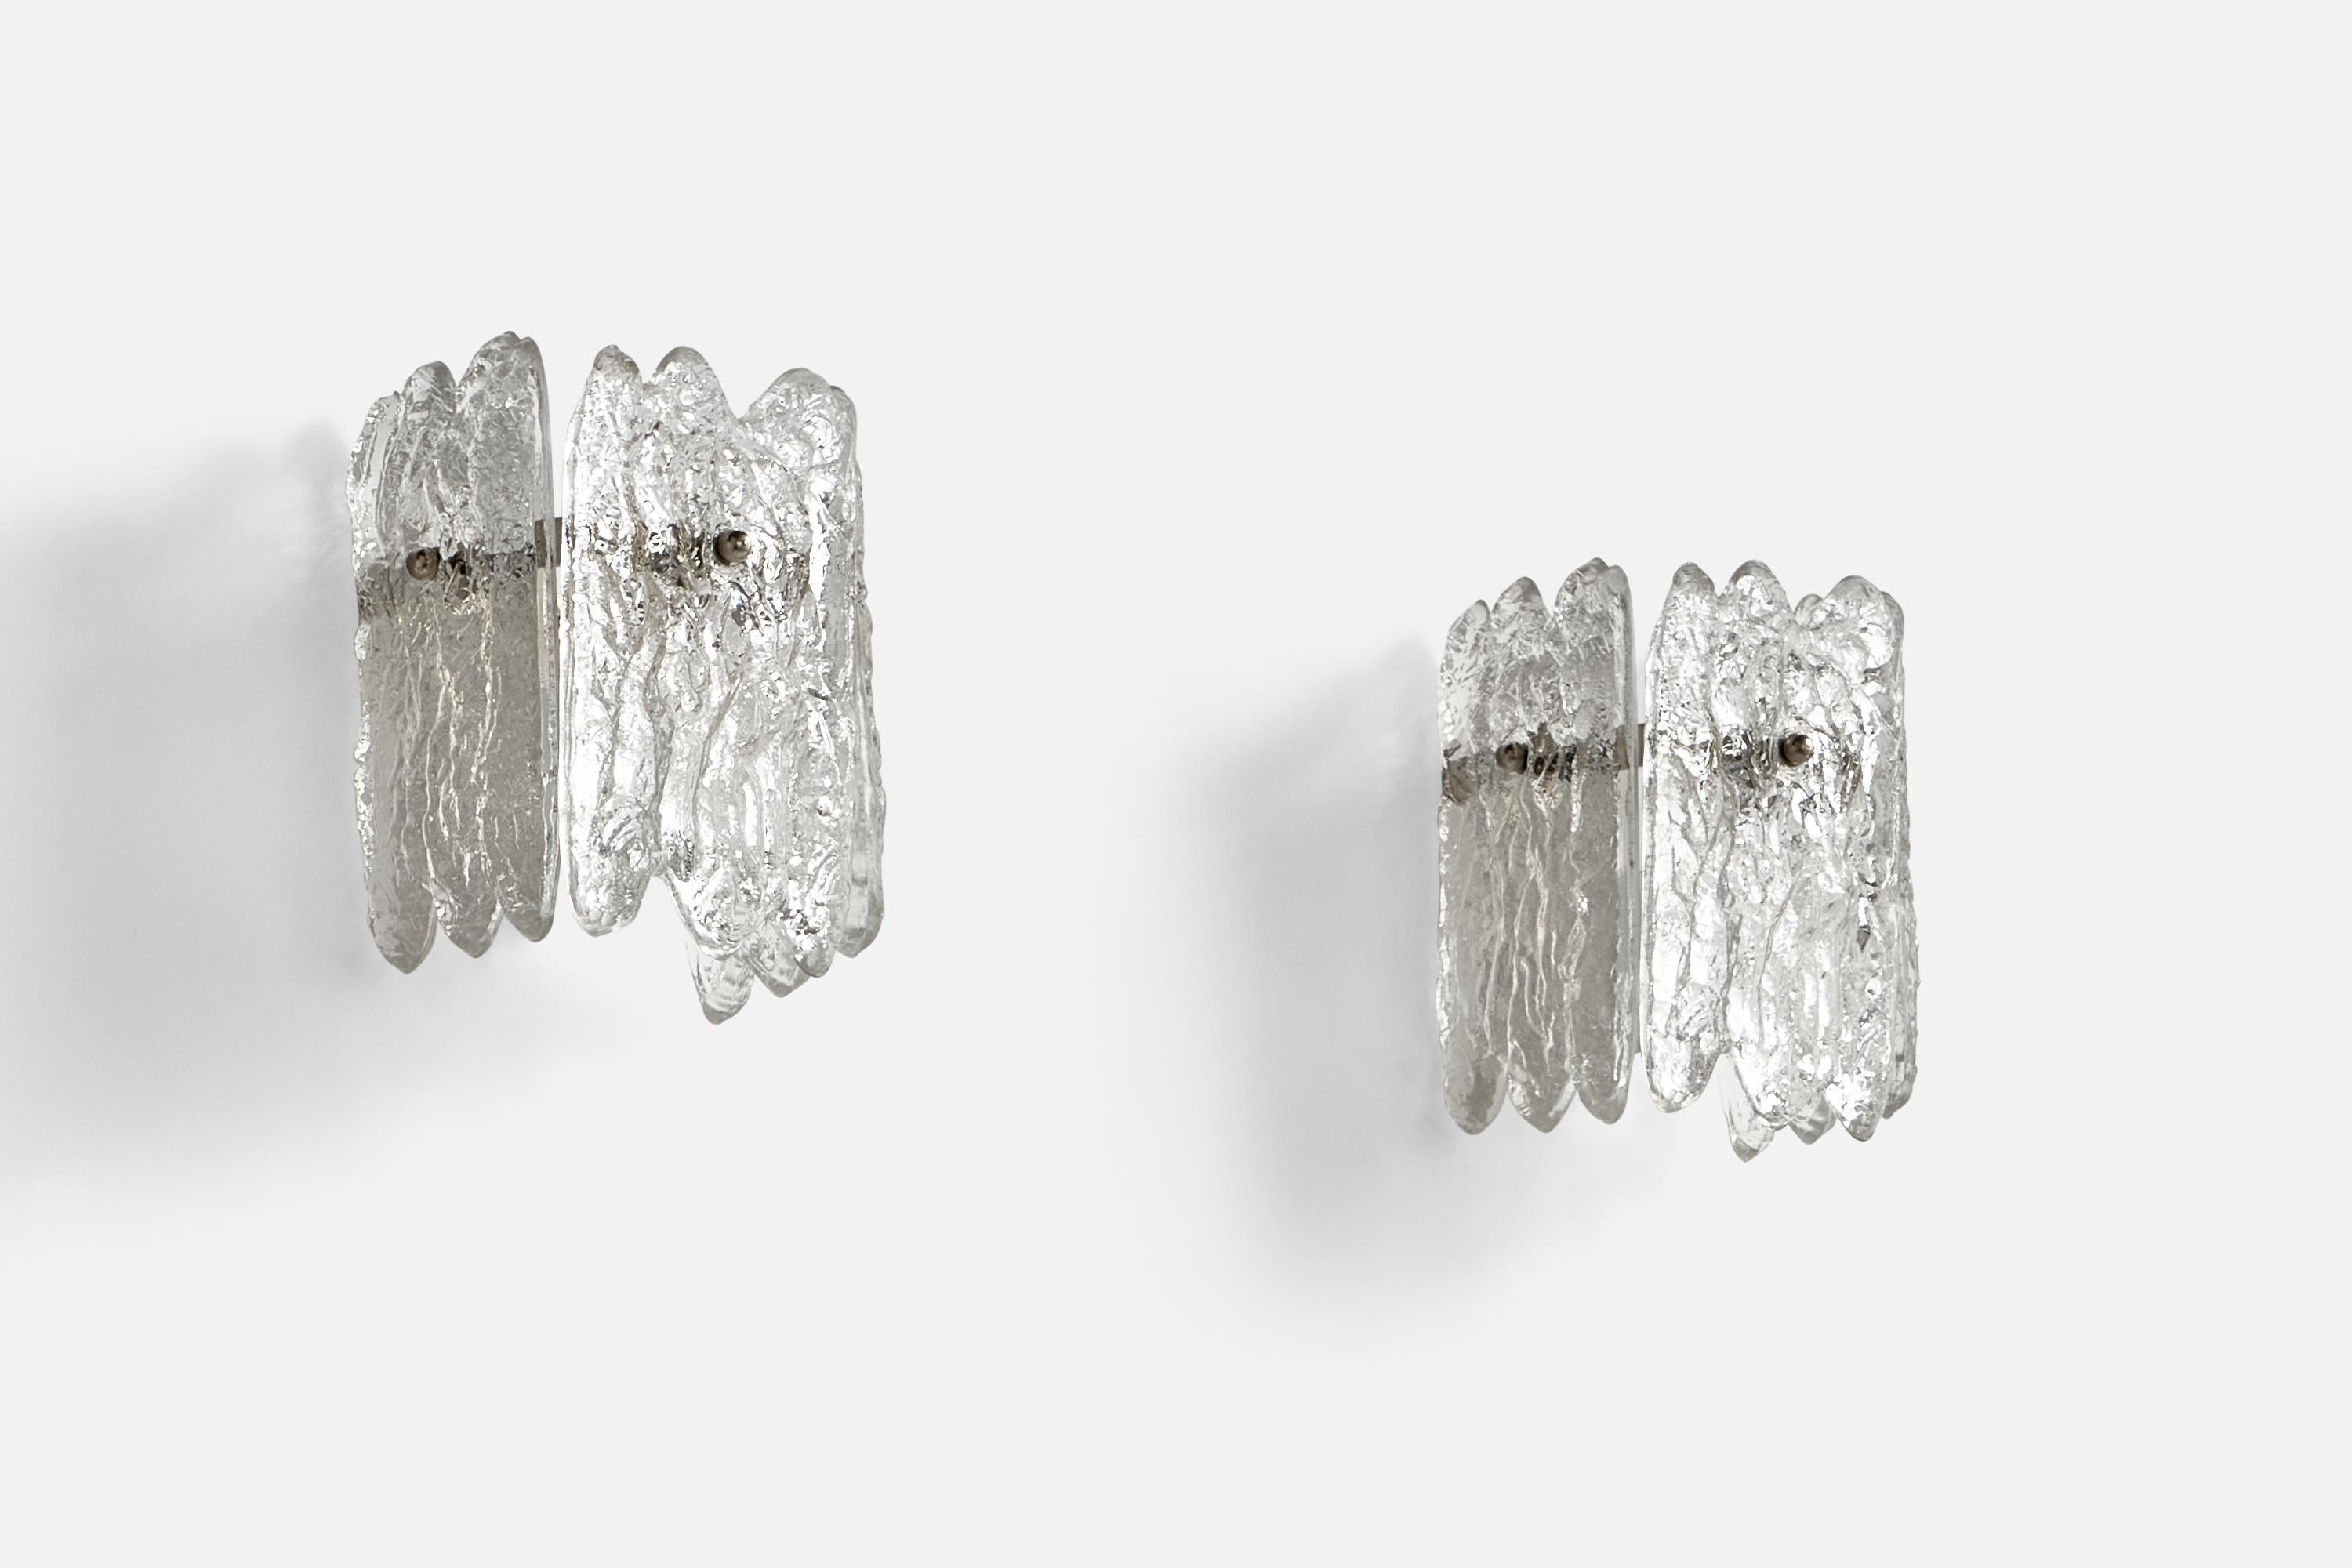 Mid-Century Modern Carl Fagerlund, Wall Lights, Glass, Metal, Sweden, 1950s For Sale